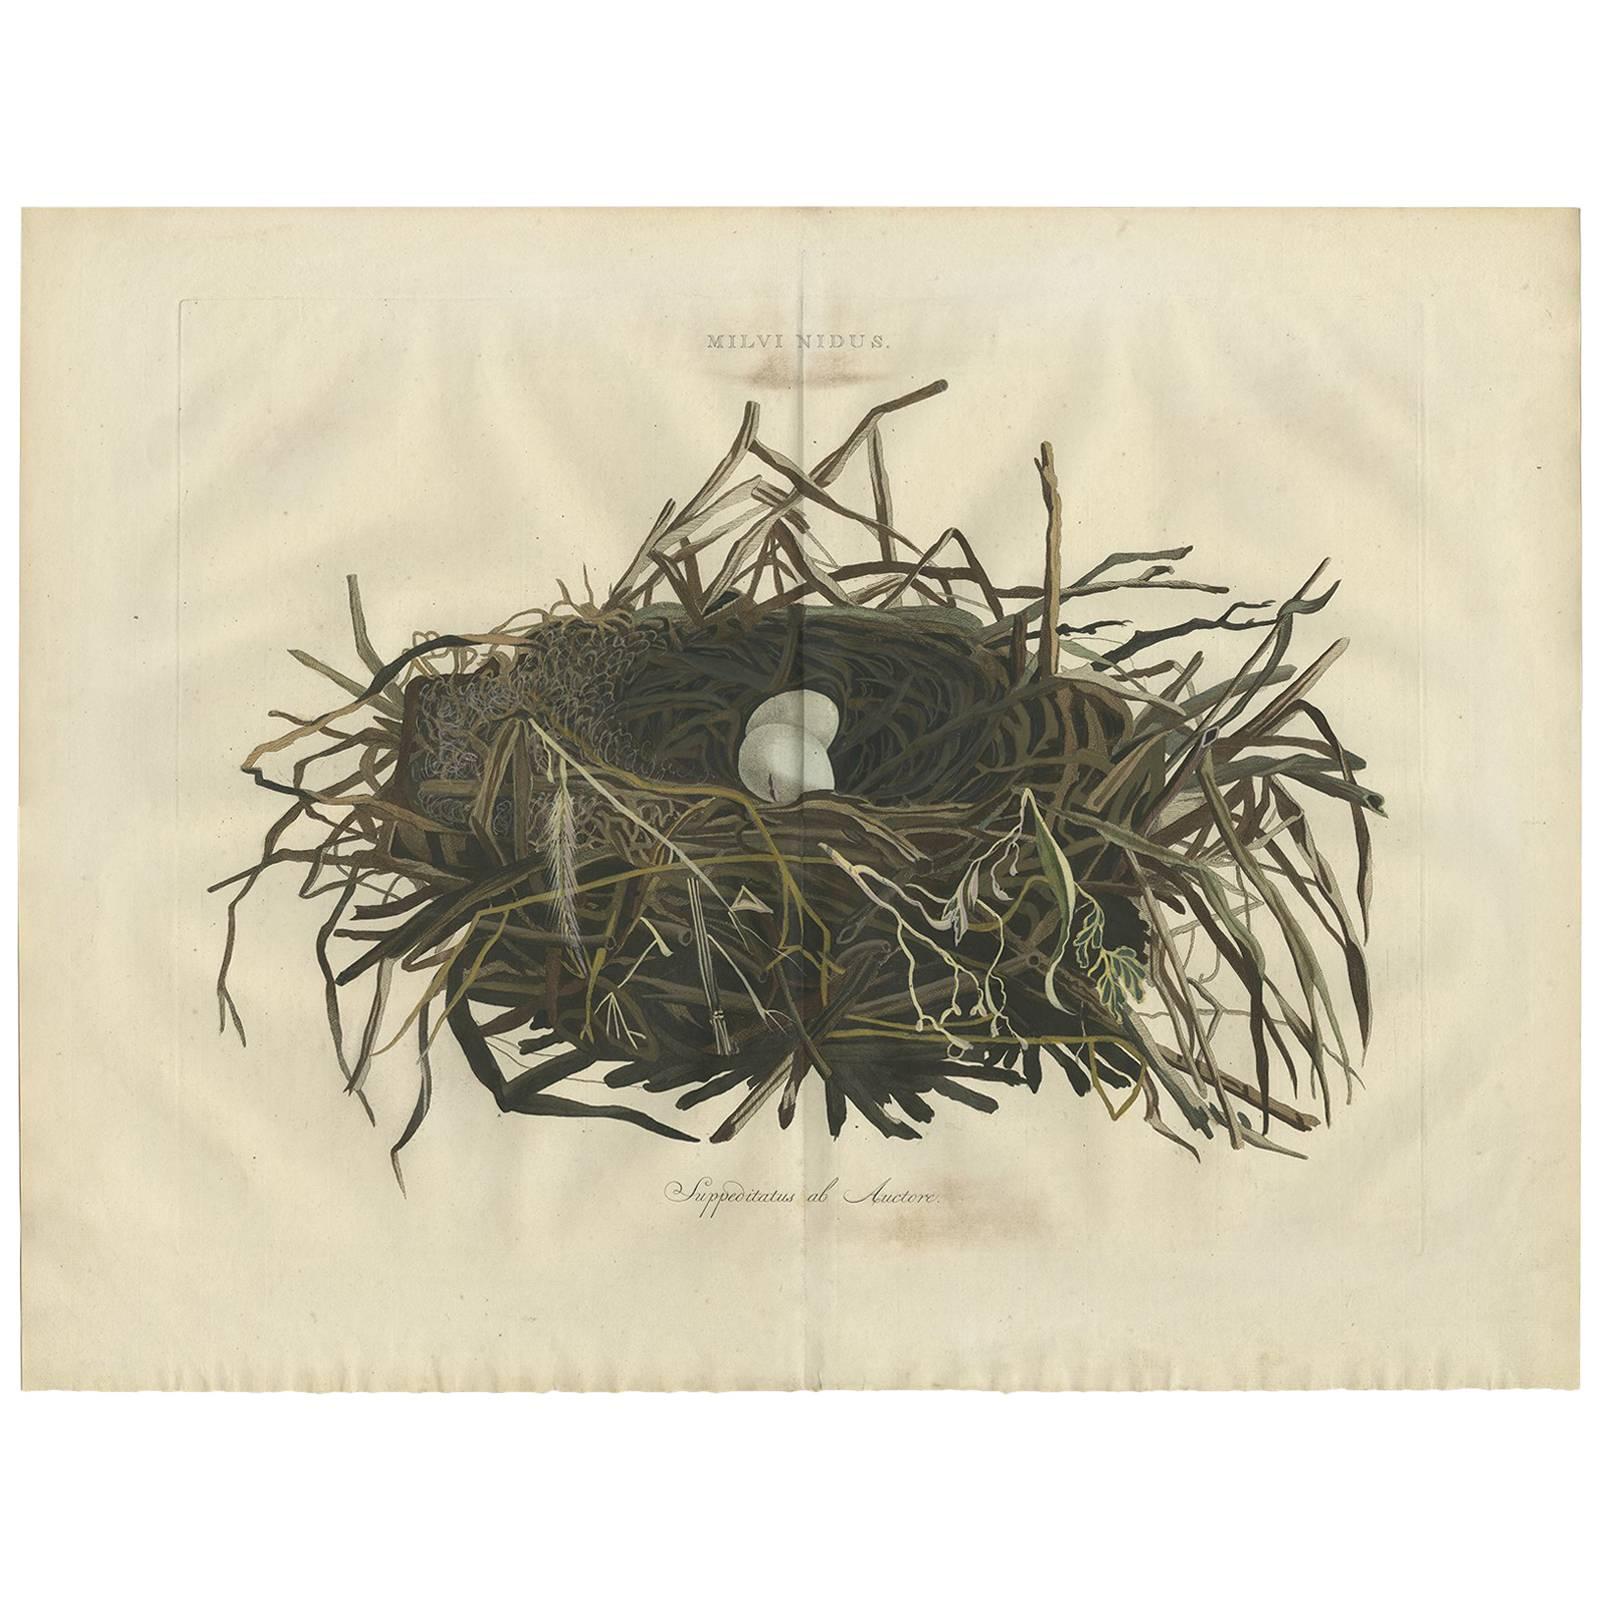 Antique Print of the Nest of the Western Marsh-Harrier by Sepp & Nozeman, 1770